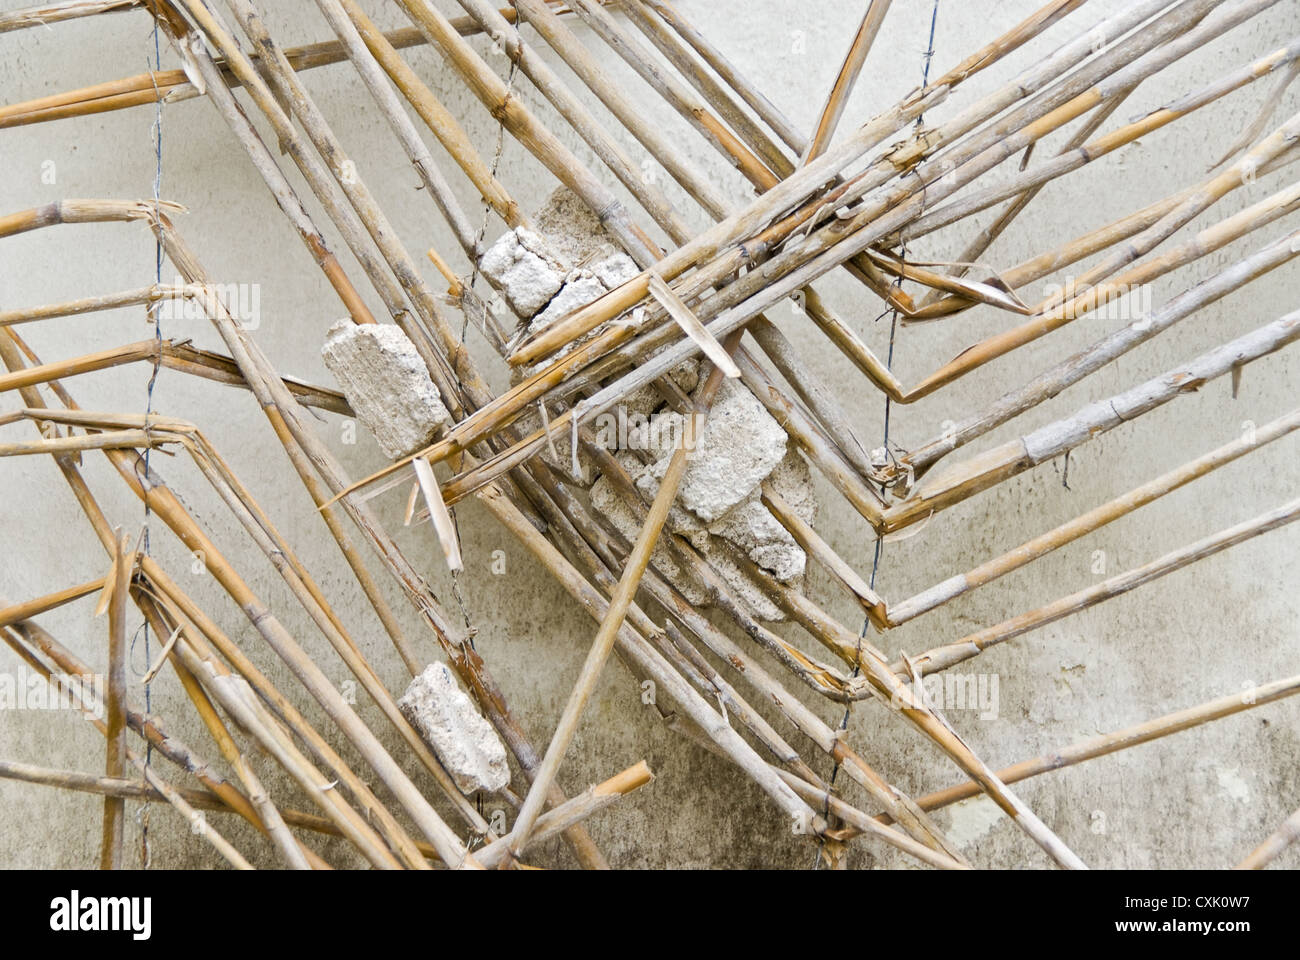 Straw mat with remnants of plaster Stock Photo